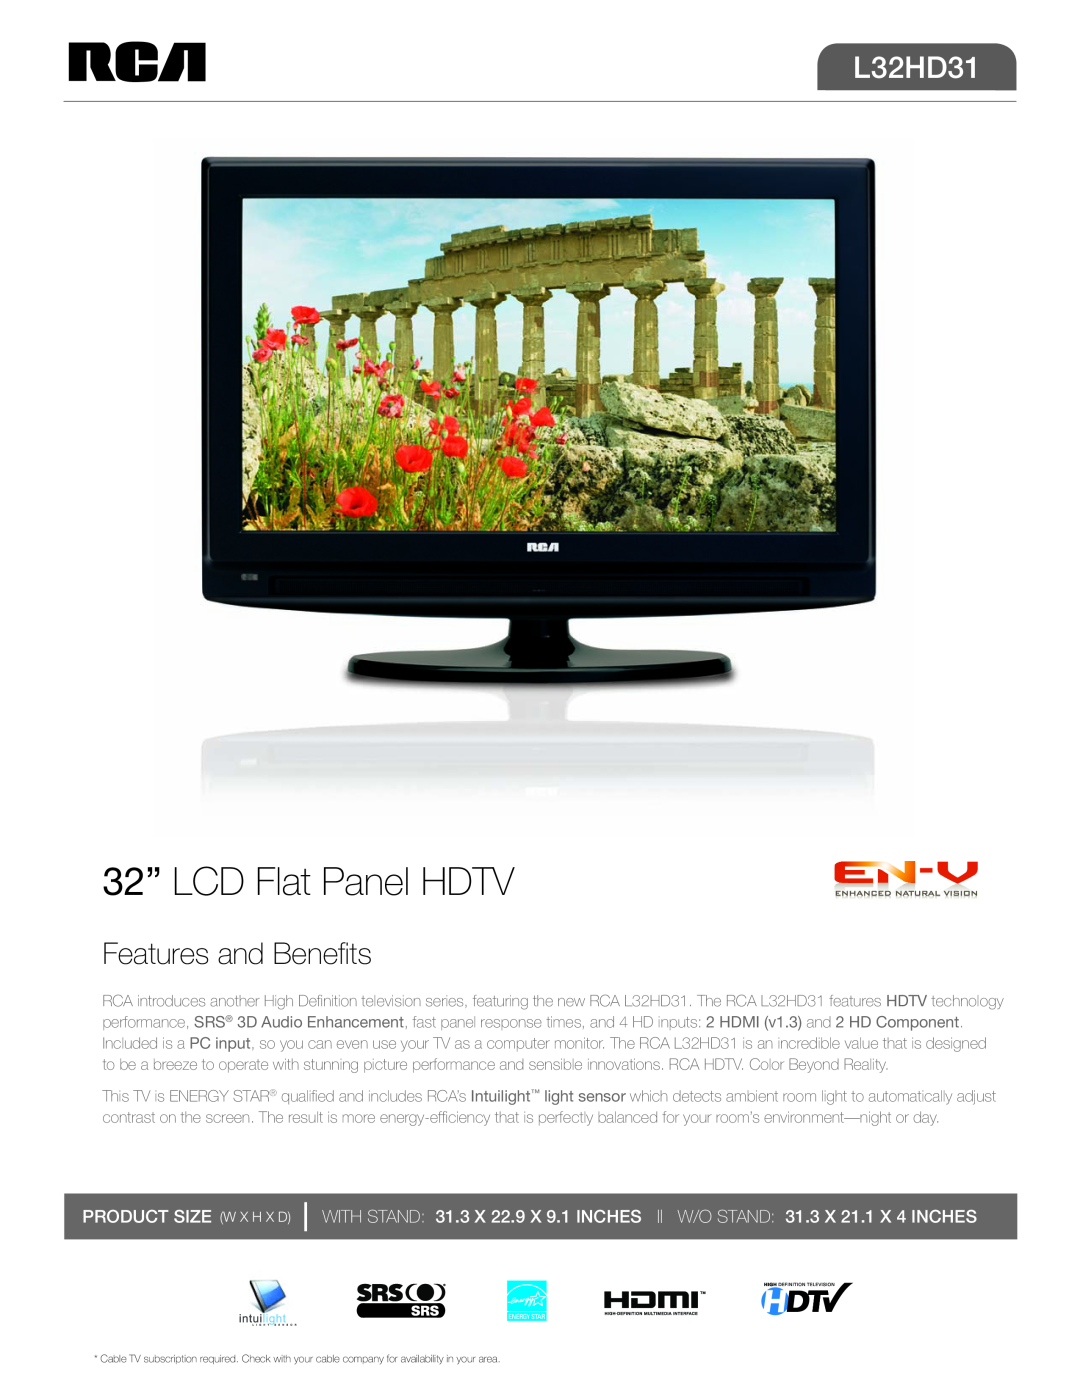 RCA L32HD31 manual 32” LCD Flat Panel HDTV, Features and Benefits, Product Size W x H x D 